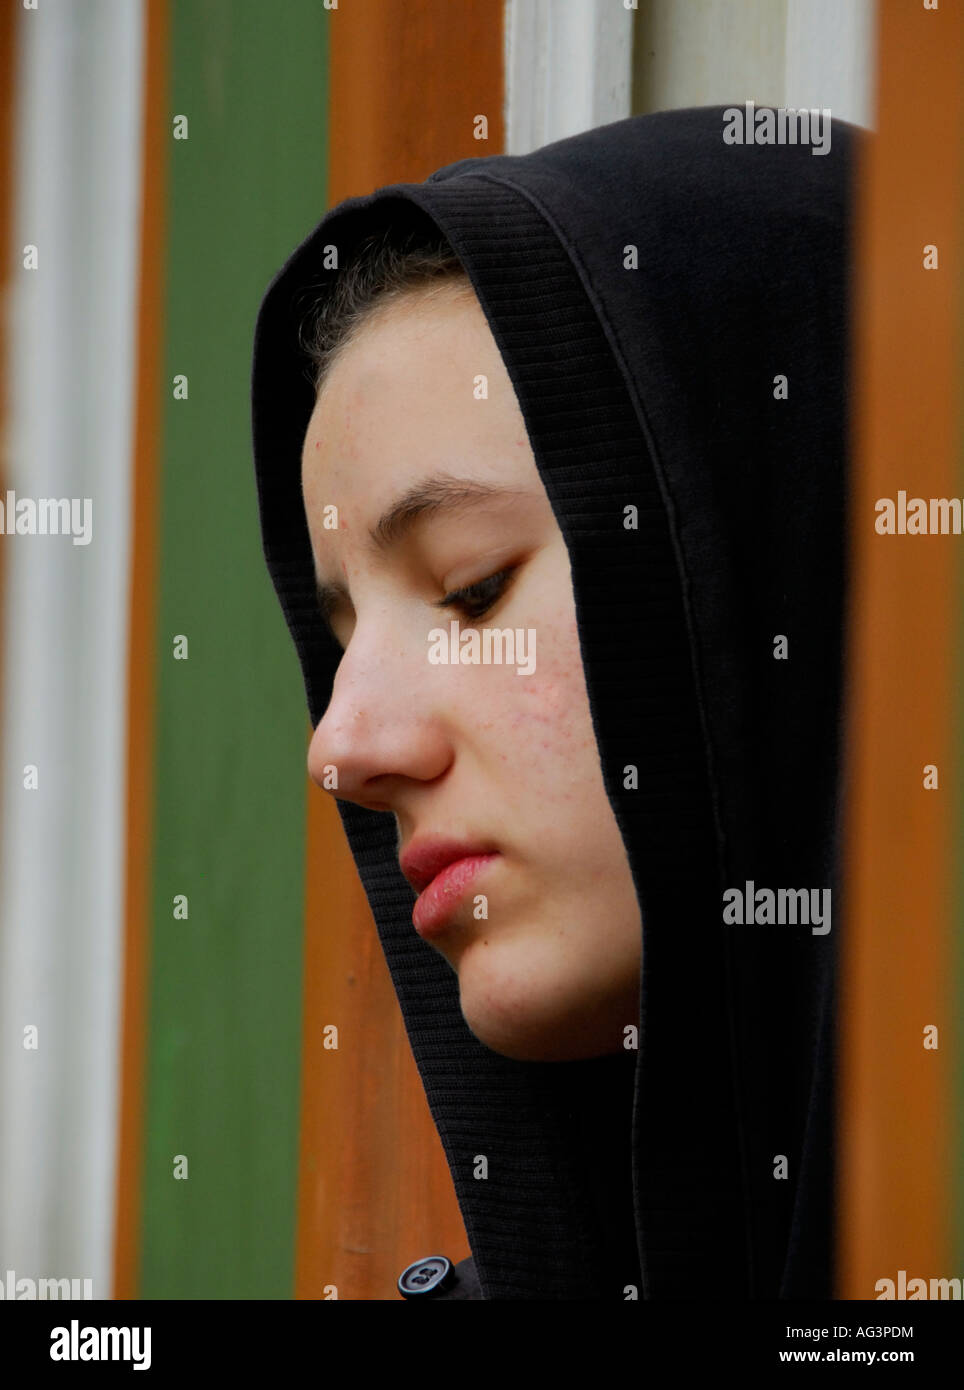 Young girl with black shawl standing pensively in doorframe, South Africa Stock Photo